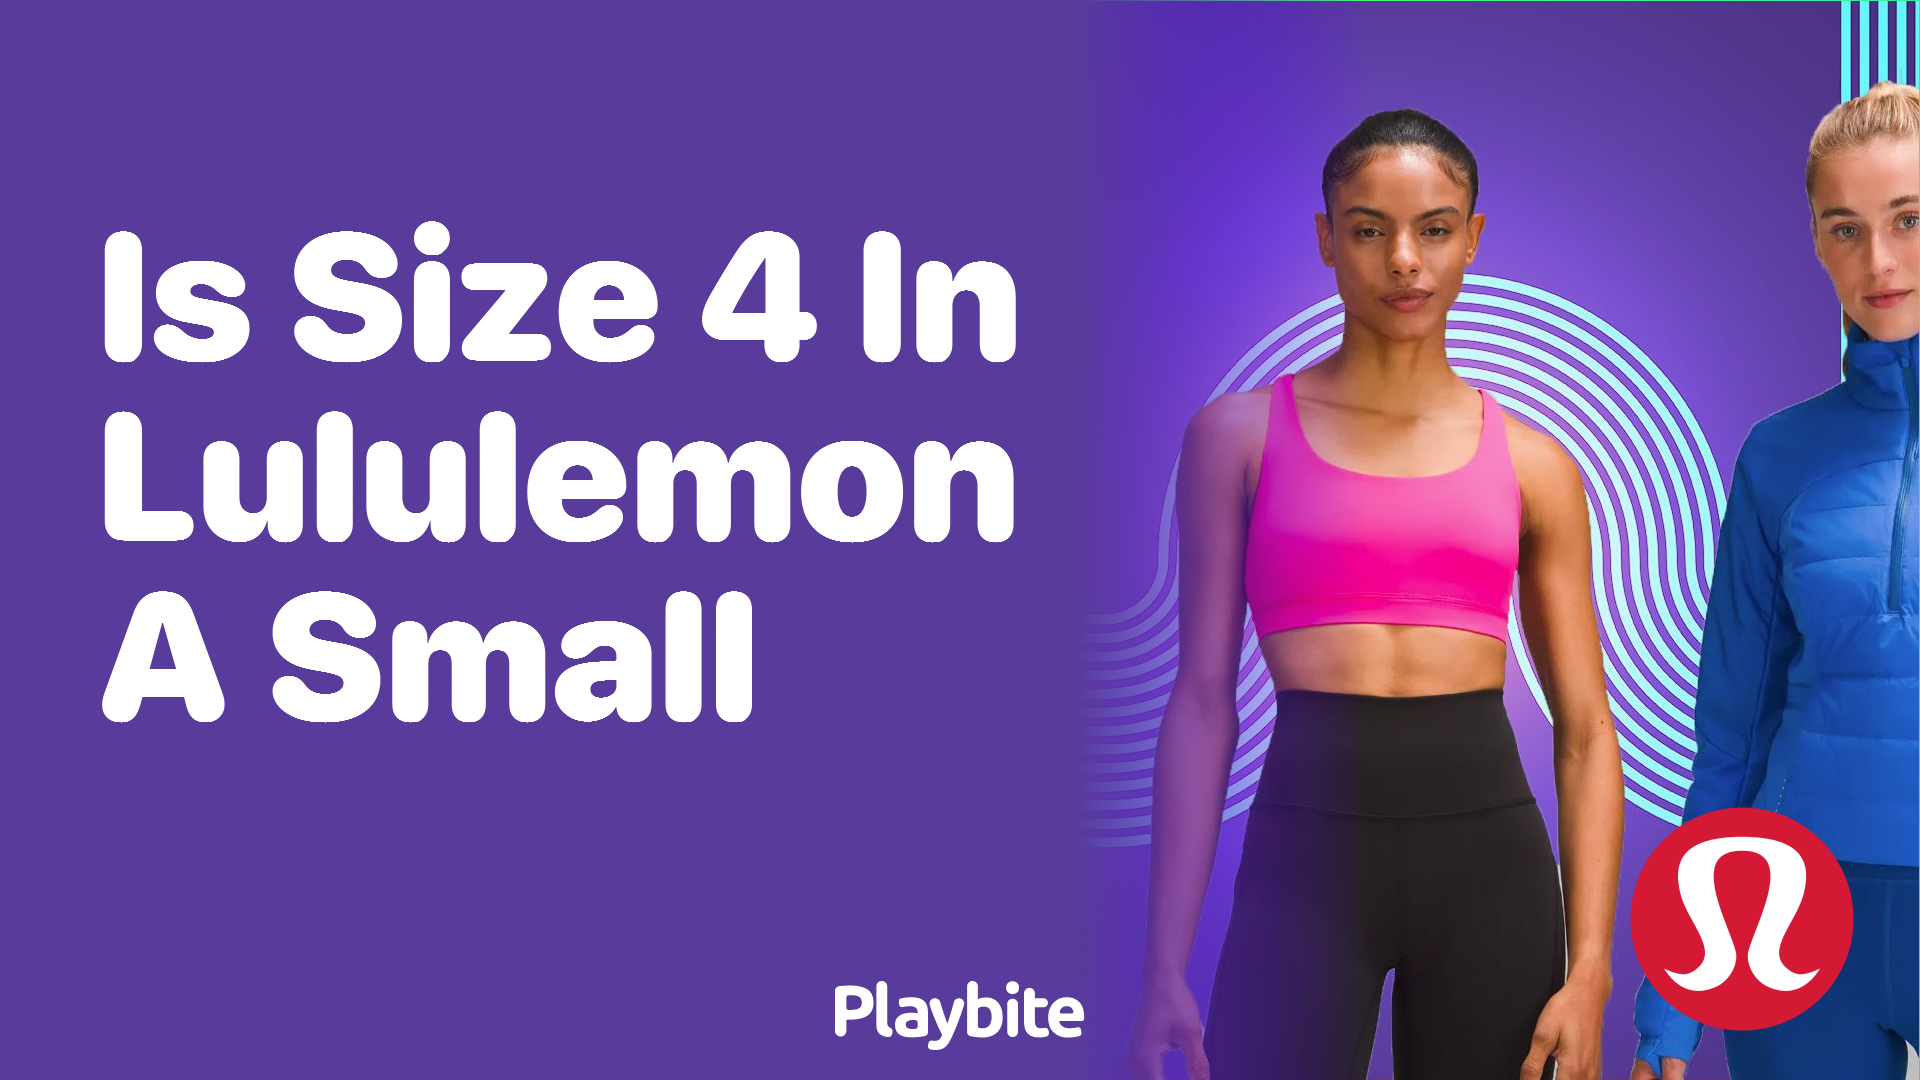 Is Size 4 in Lululemon Considered a Small? - Playbite